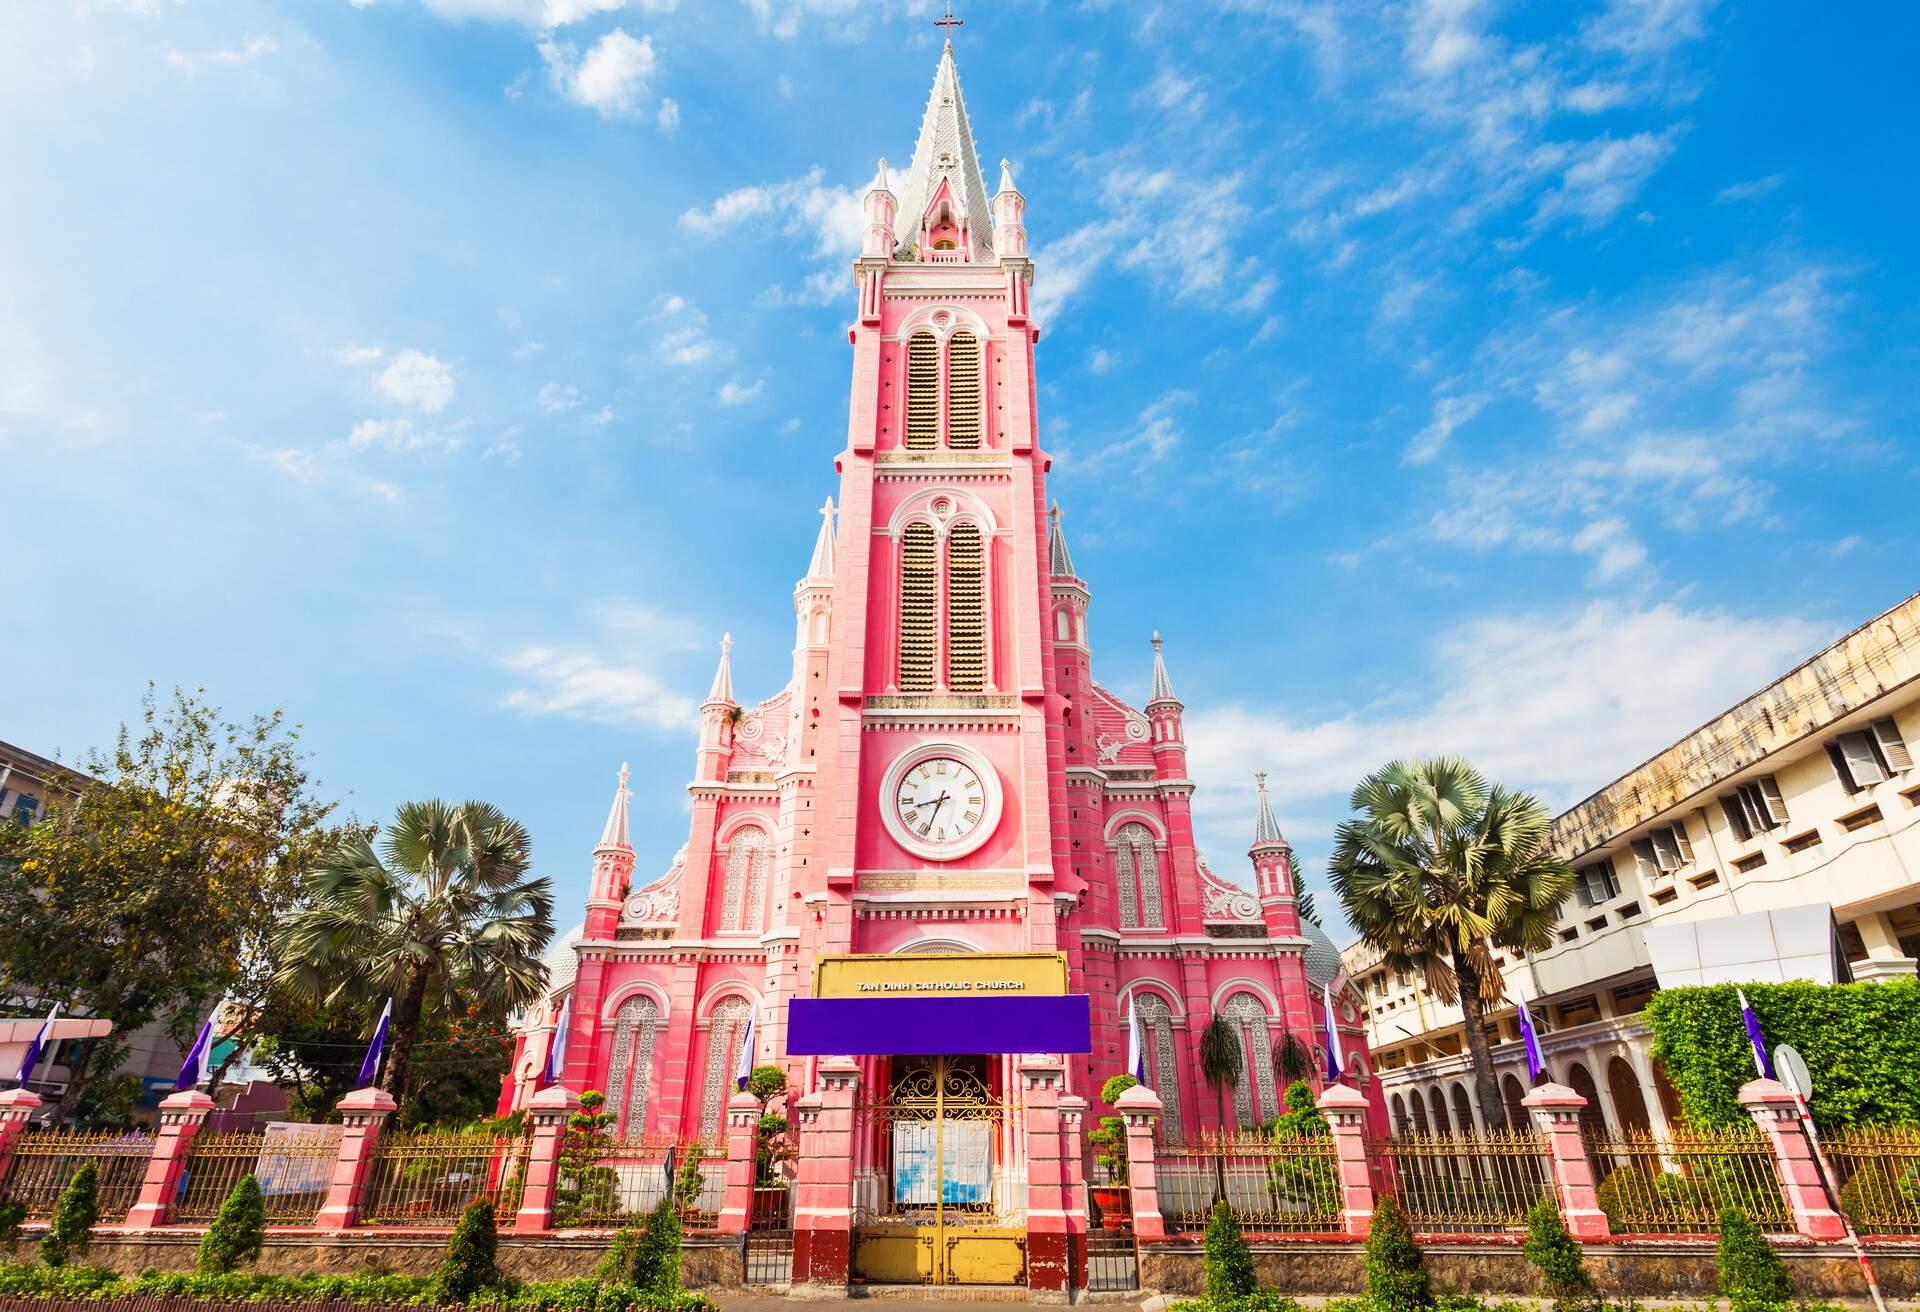 A unique church painted in pastel pink with a central clock tower protruding into the sky.